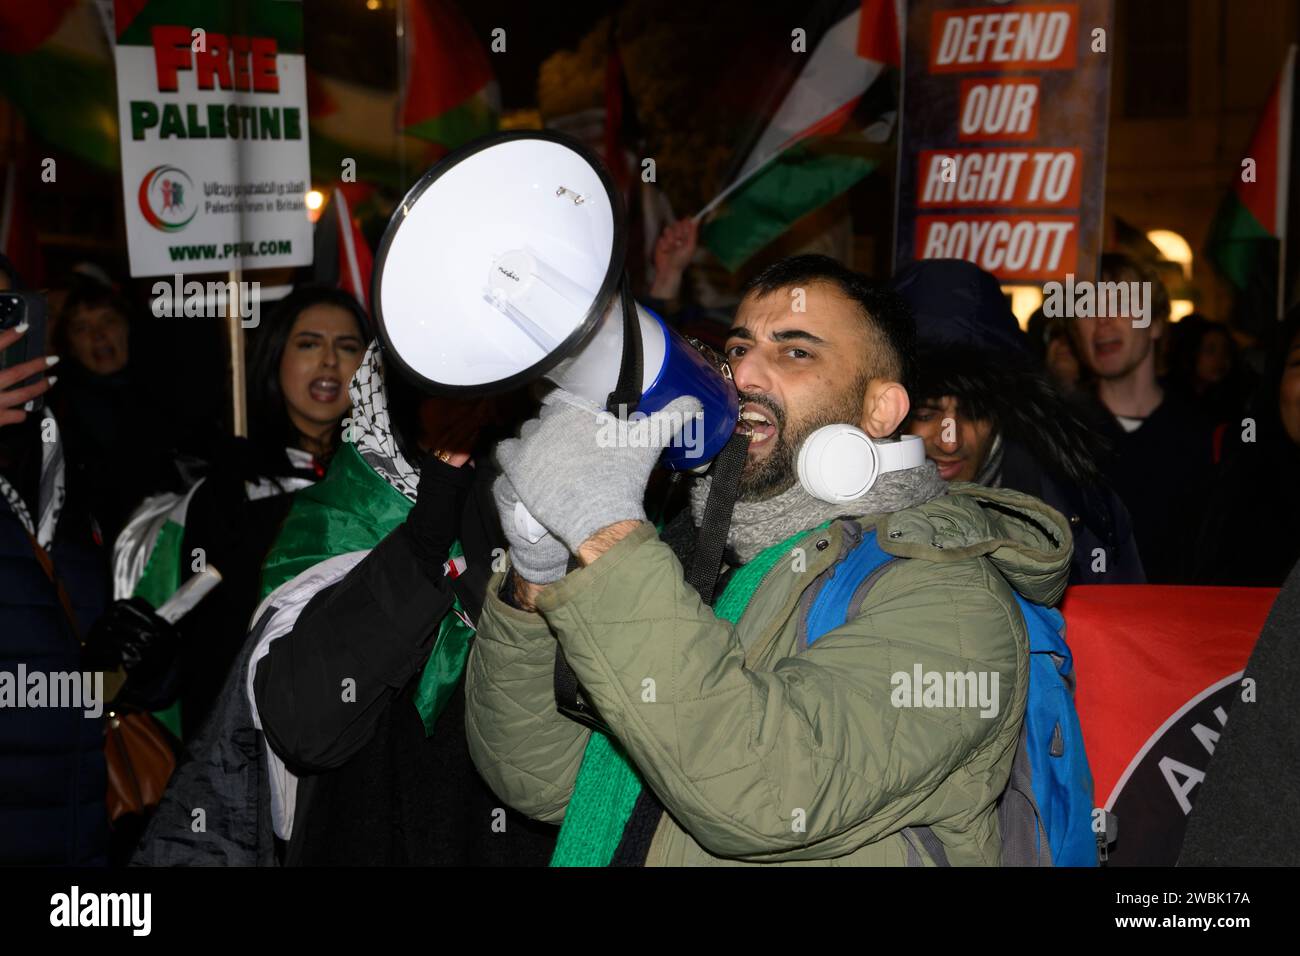 A protest mainly by pro-Palestine demonstrators outside the Houses of Parliament against the new 'Economic Activity of Public Bodies (Overseas Matters Stock Photo